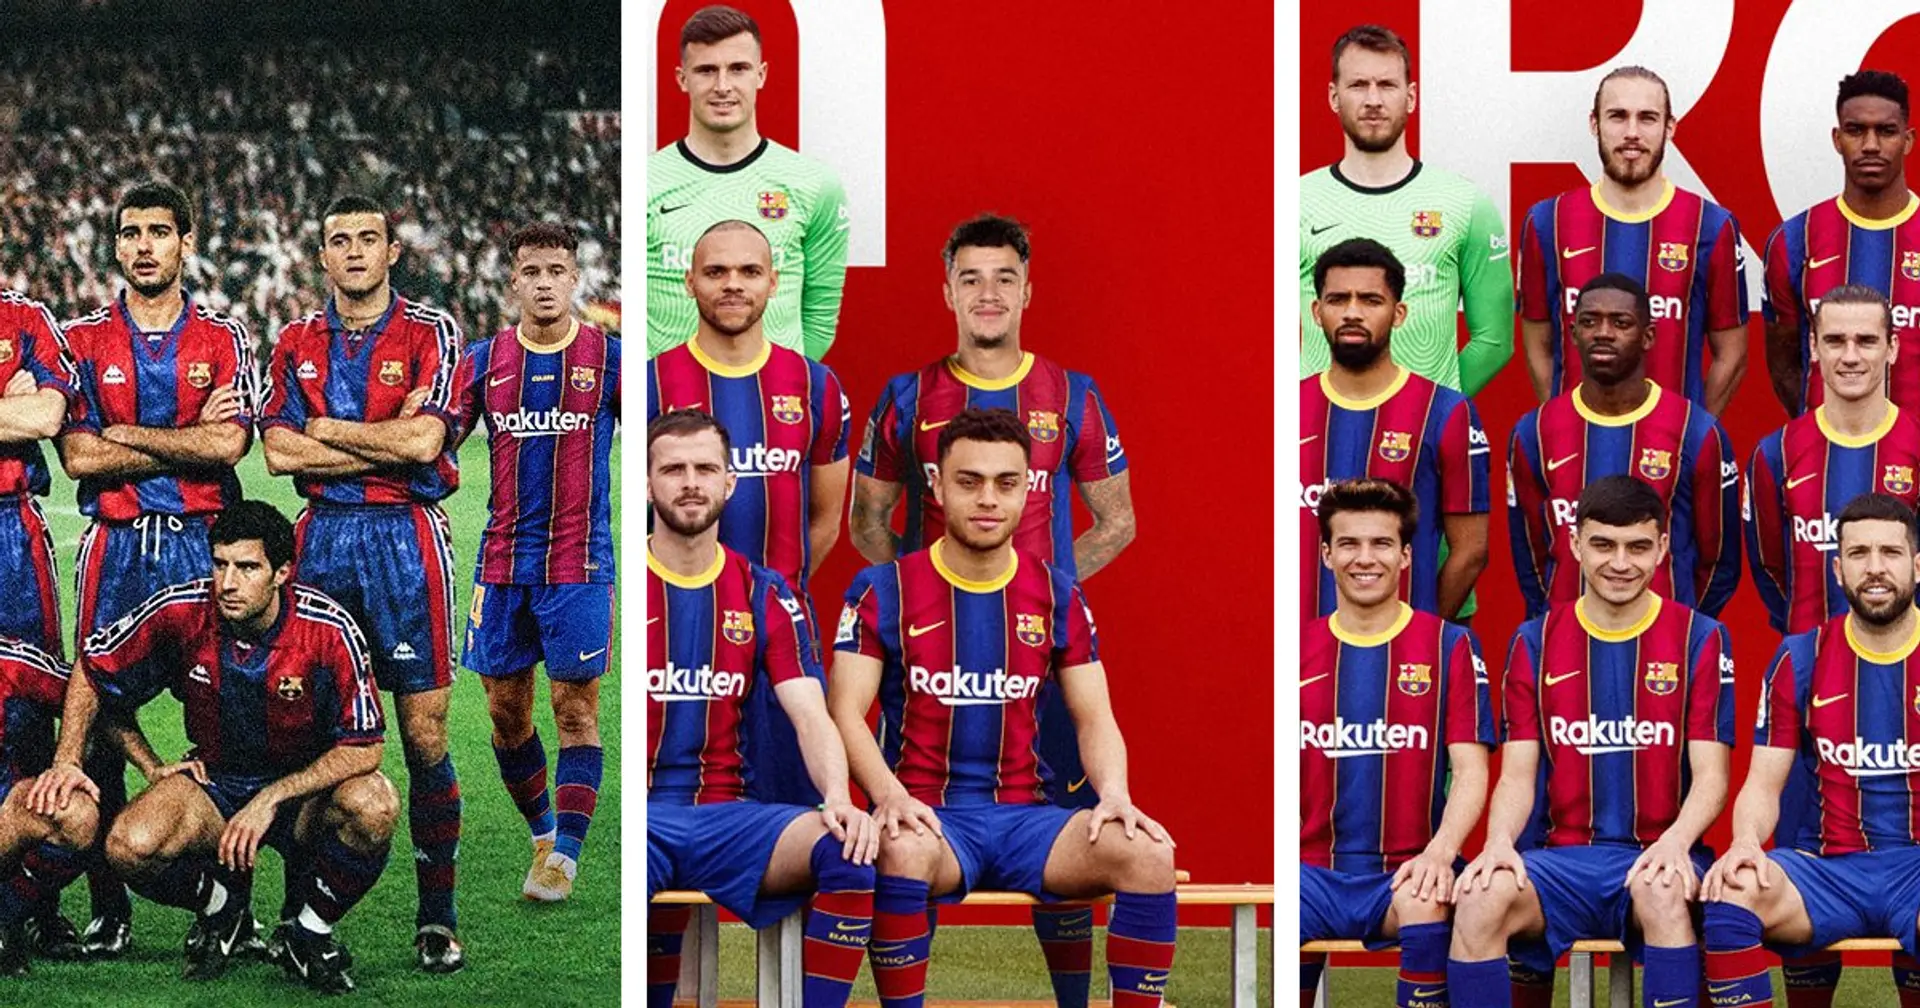 'Dembele once again missing the target and Coutinho being photoshopped': Fans react to Barca's official team photo of 2020/21